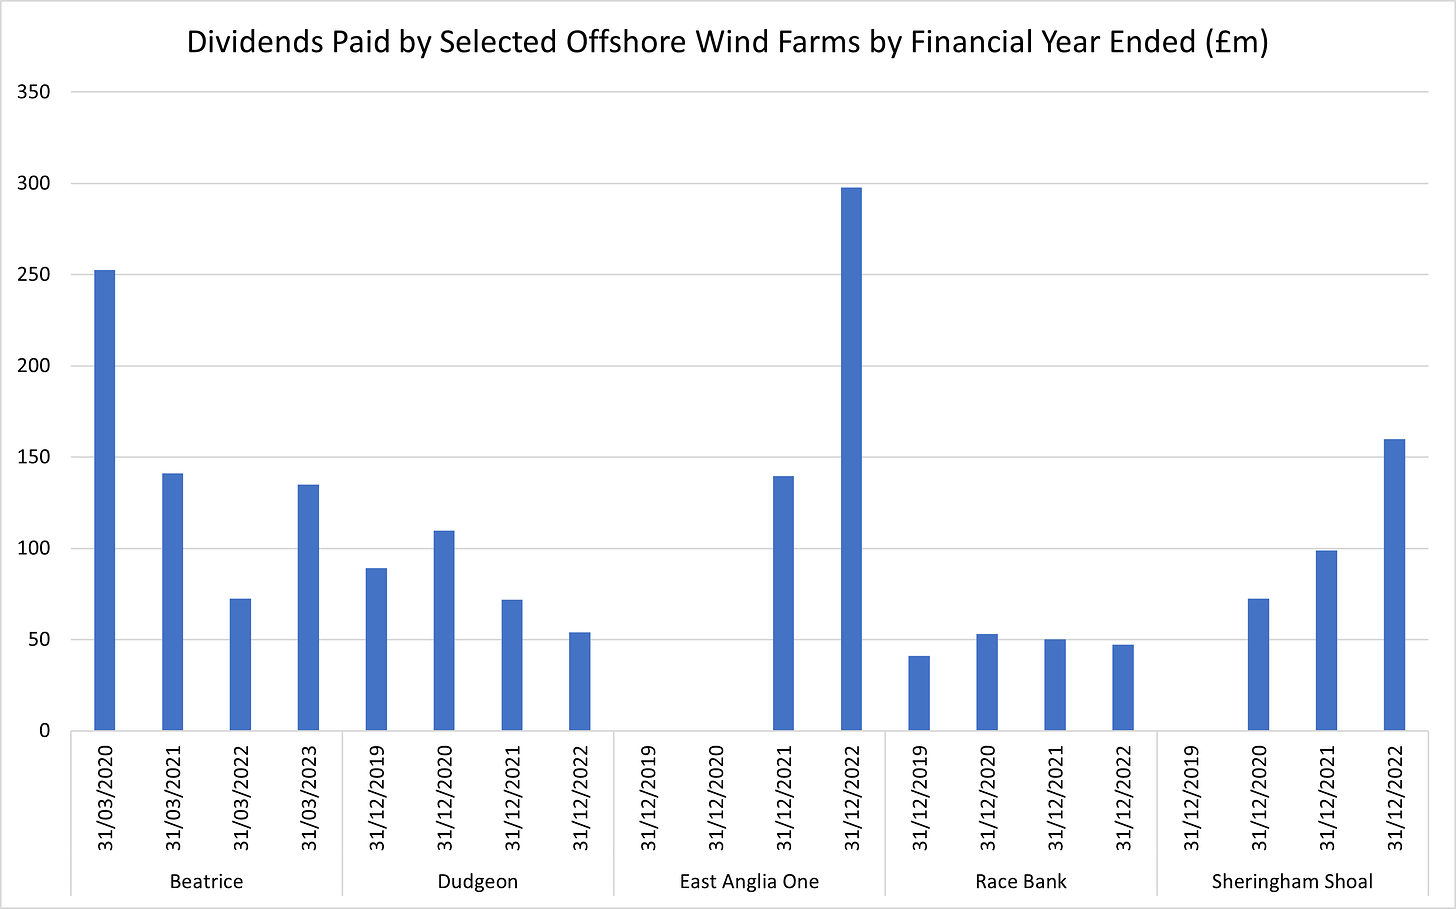 Figure D - Dividends Paid by Selected Offshore Wind Farms (£m)